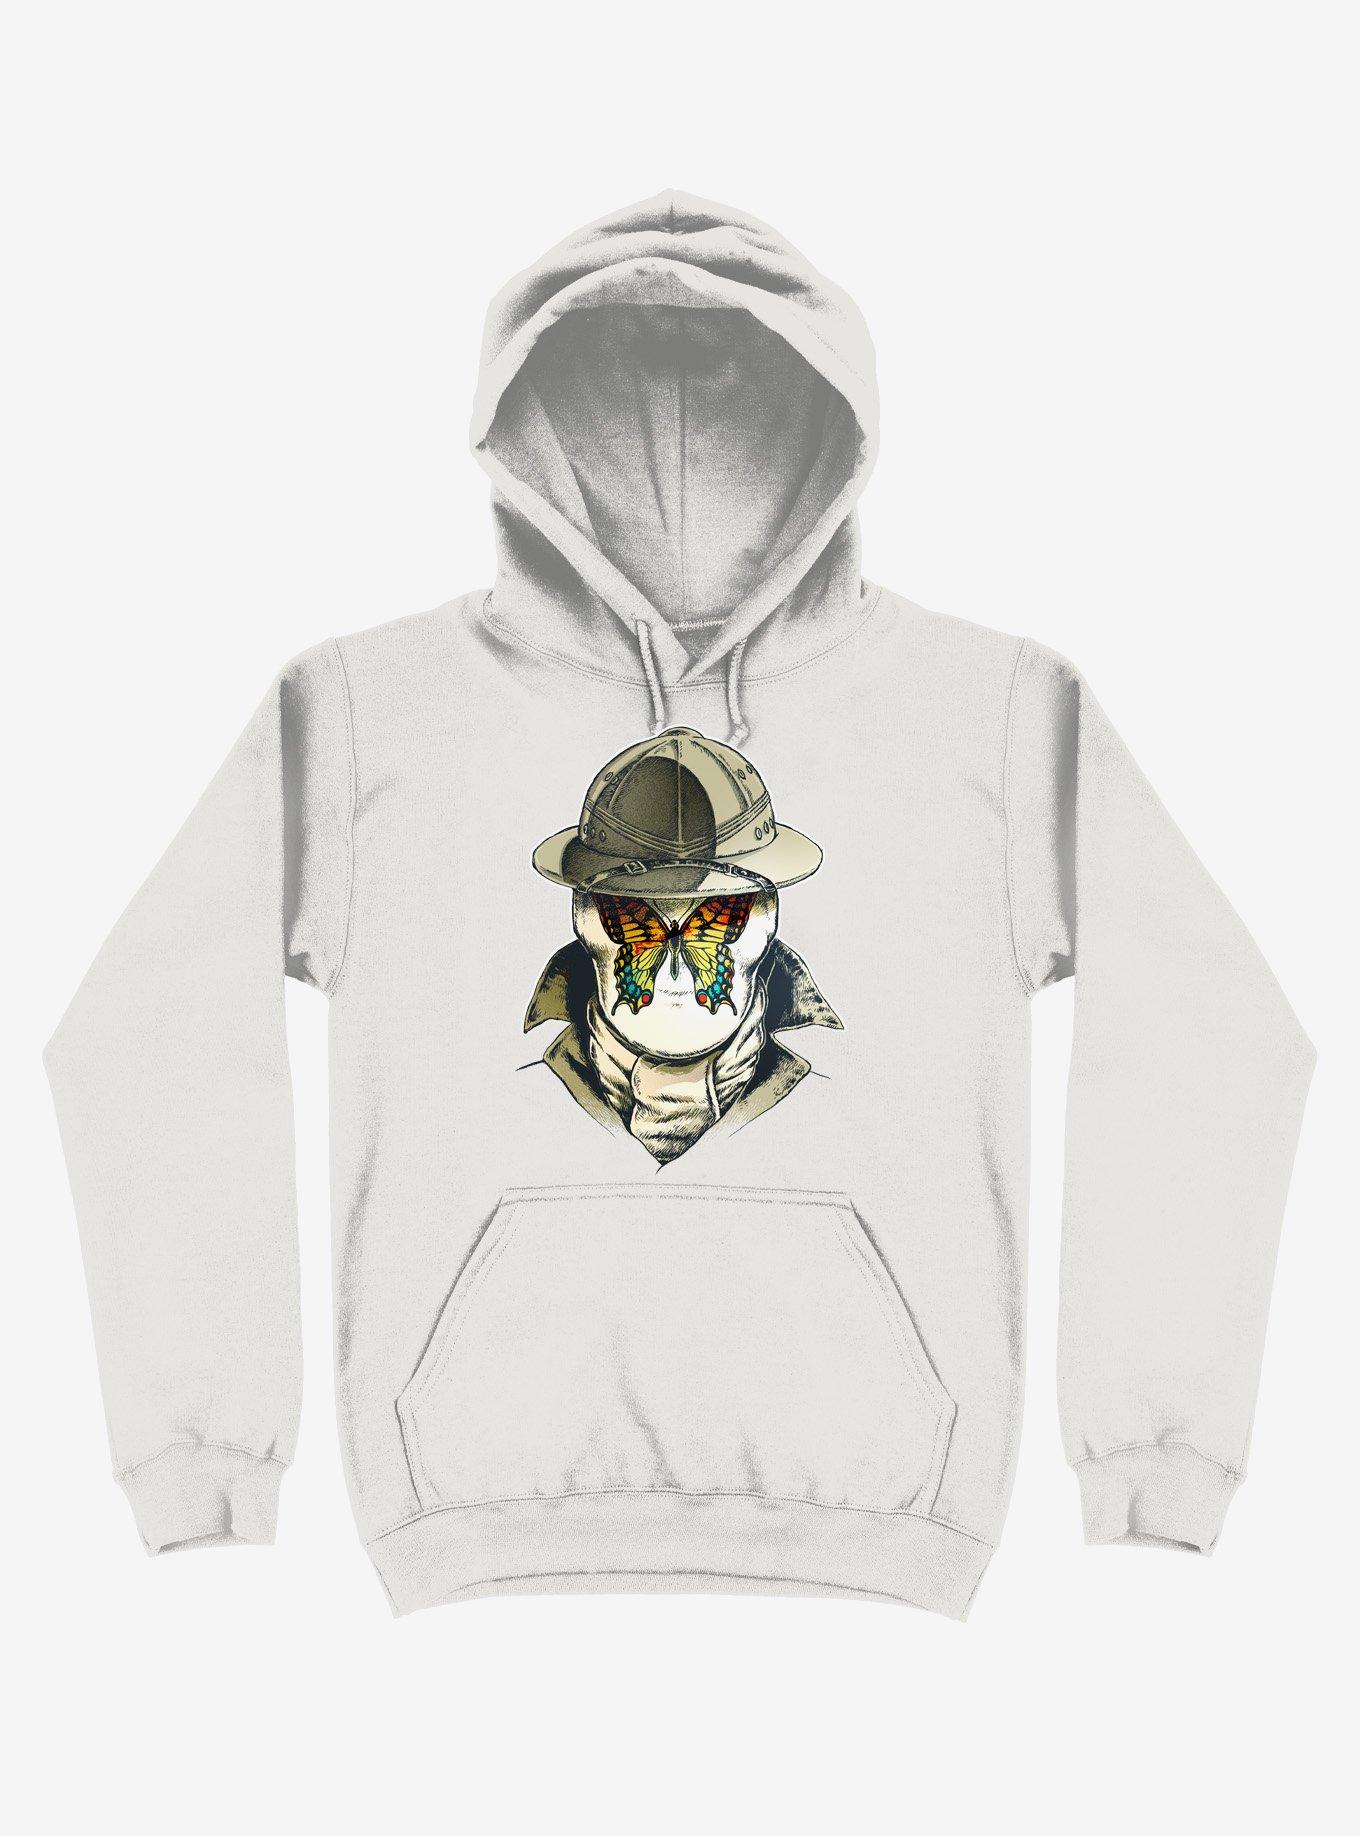 Rorschach Butterfly - 5G White Hoodie - WHITE | Hot Topic